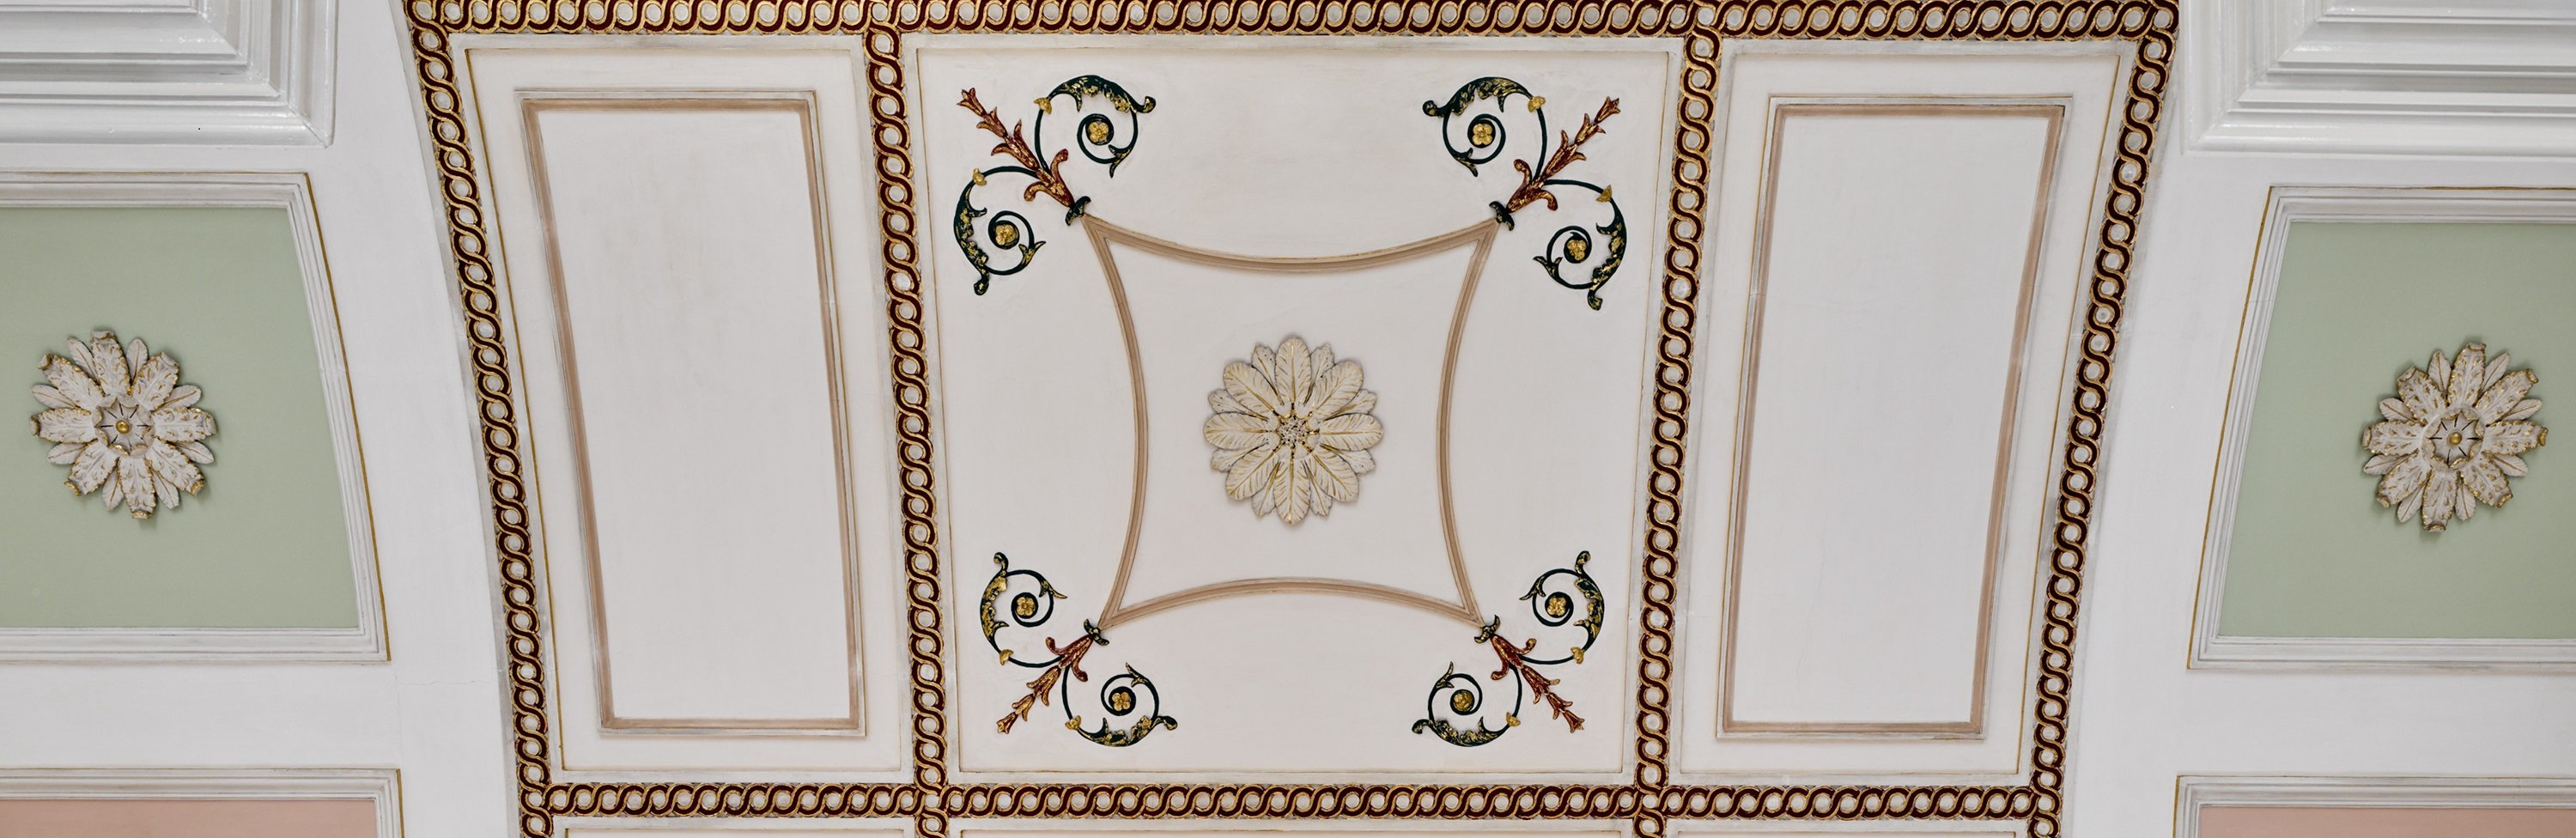 library ceiling2